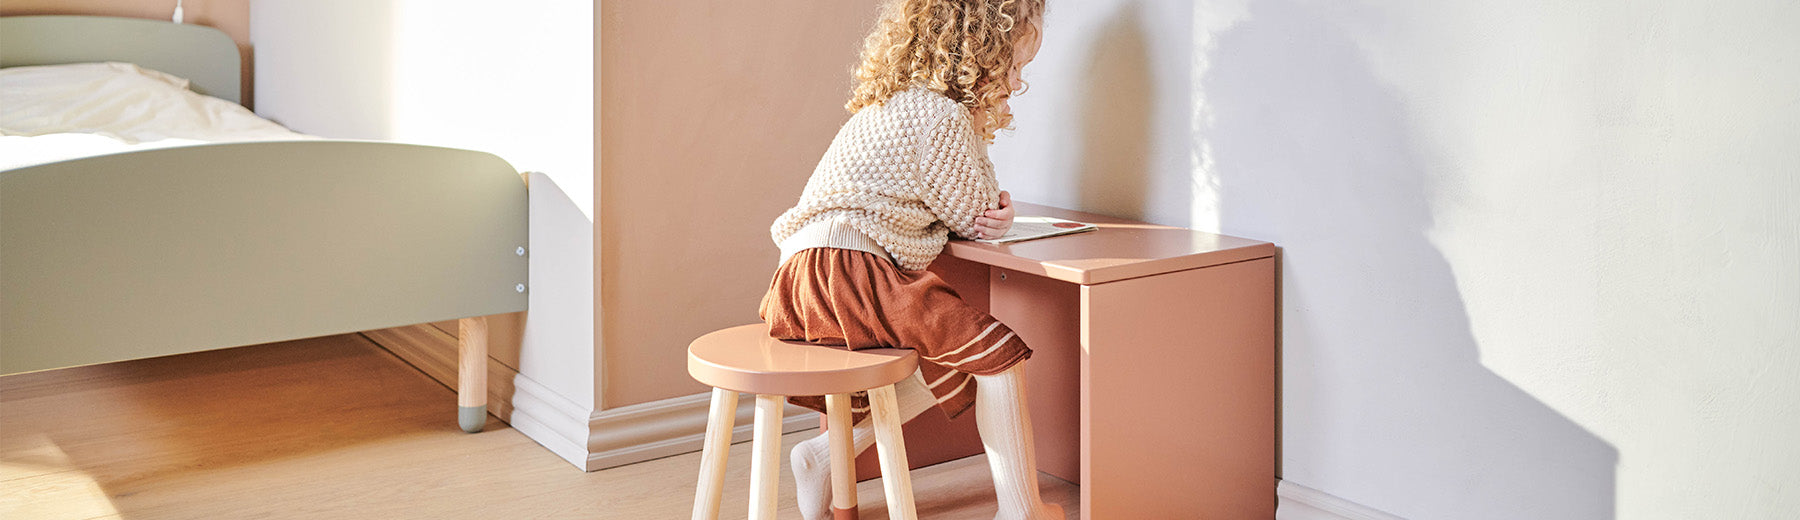 Child is sitting on a wooden stool from FLEXA